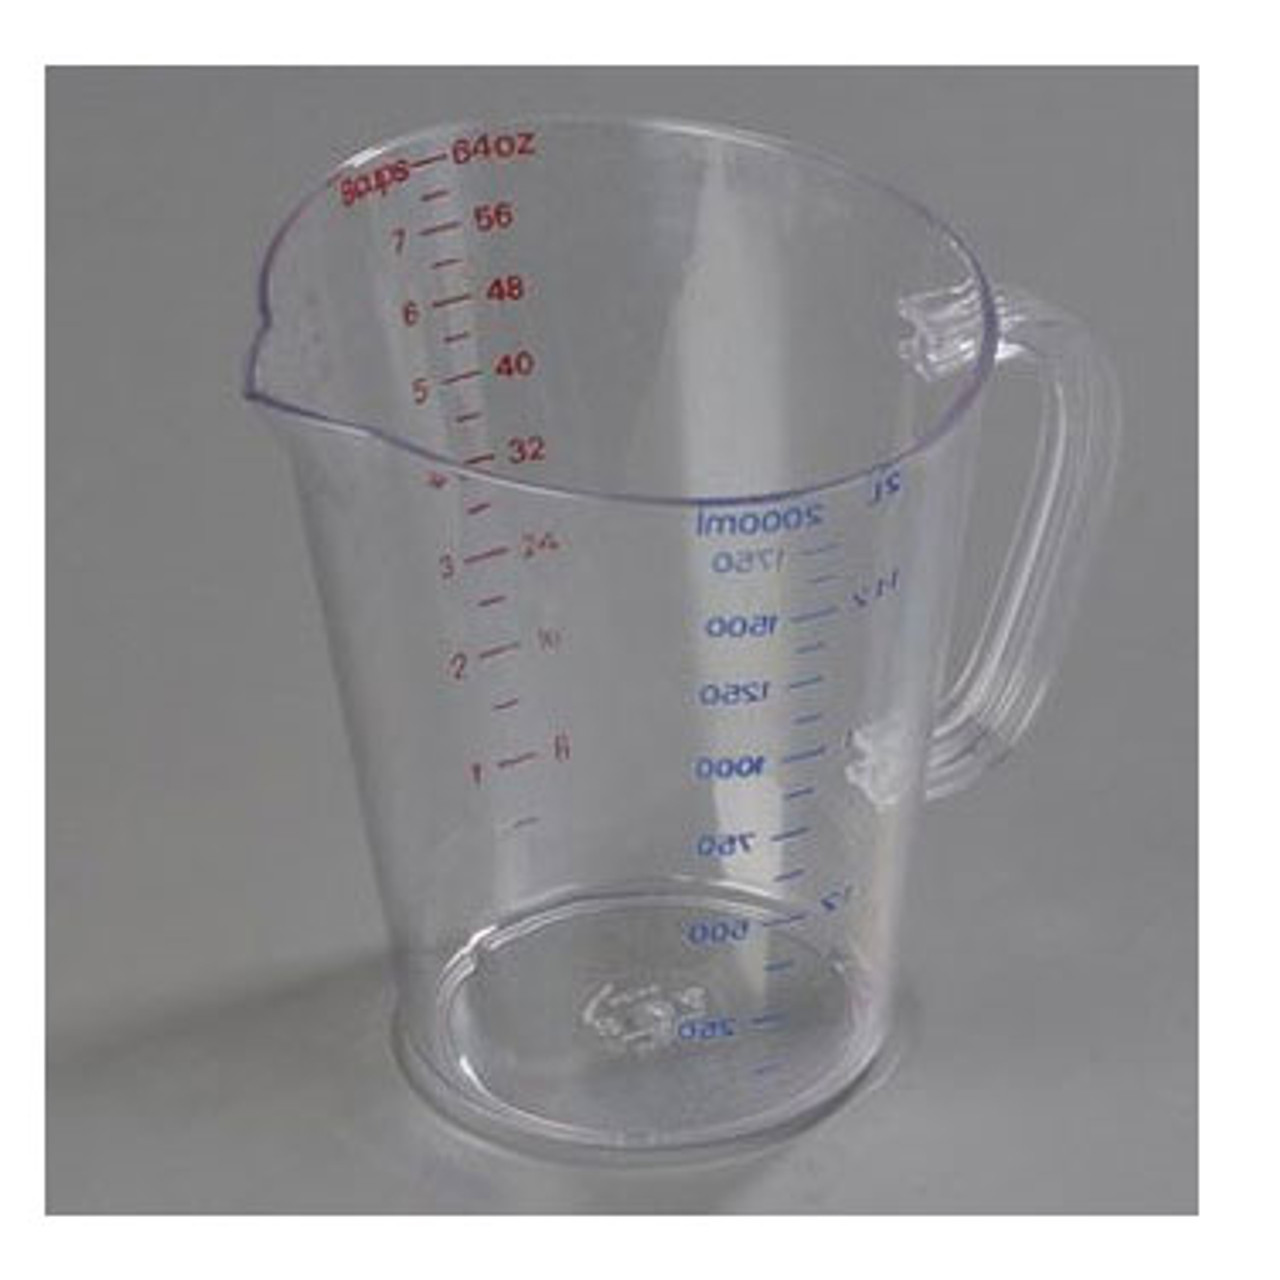 https://cdn11.bigcommerce.com/s-g3i86bef61/images/stencil/1280x1280/products/3188/1022/Carlisle-4314407-Measuring-Cups__06753.1662041245.jpg?c=1